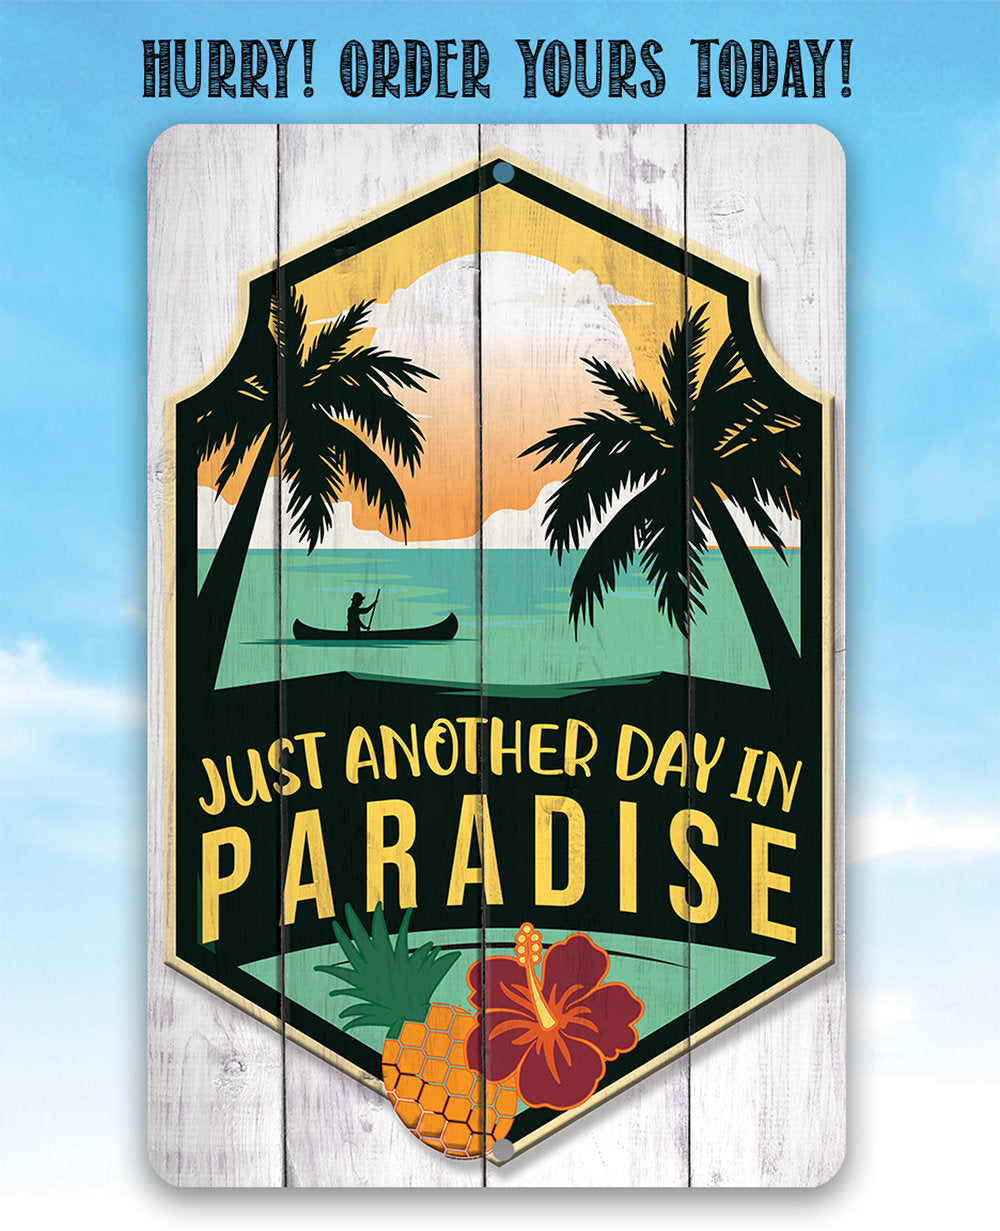 Just Another Day In Paradise - 8" x 12" or 12" x 18" Aluminum Tin Awesome Metal Poster Lone Star Art 